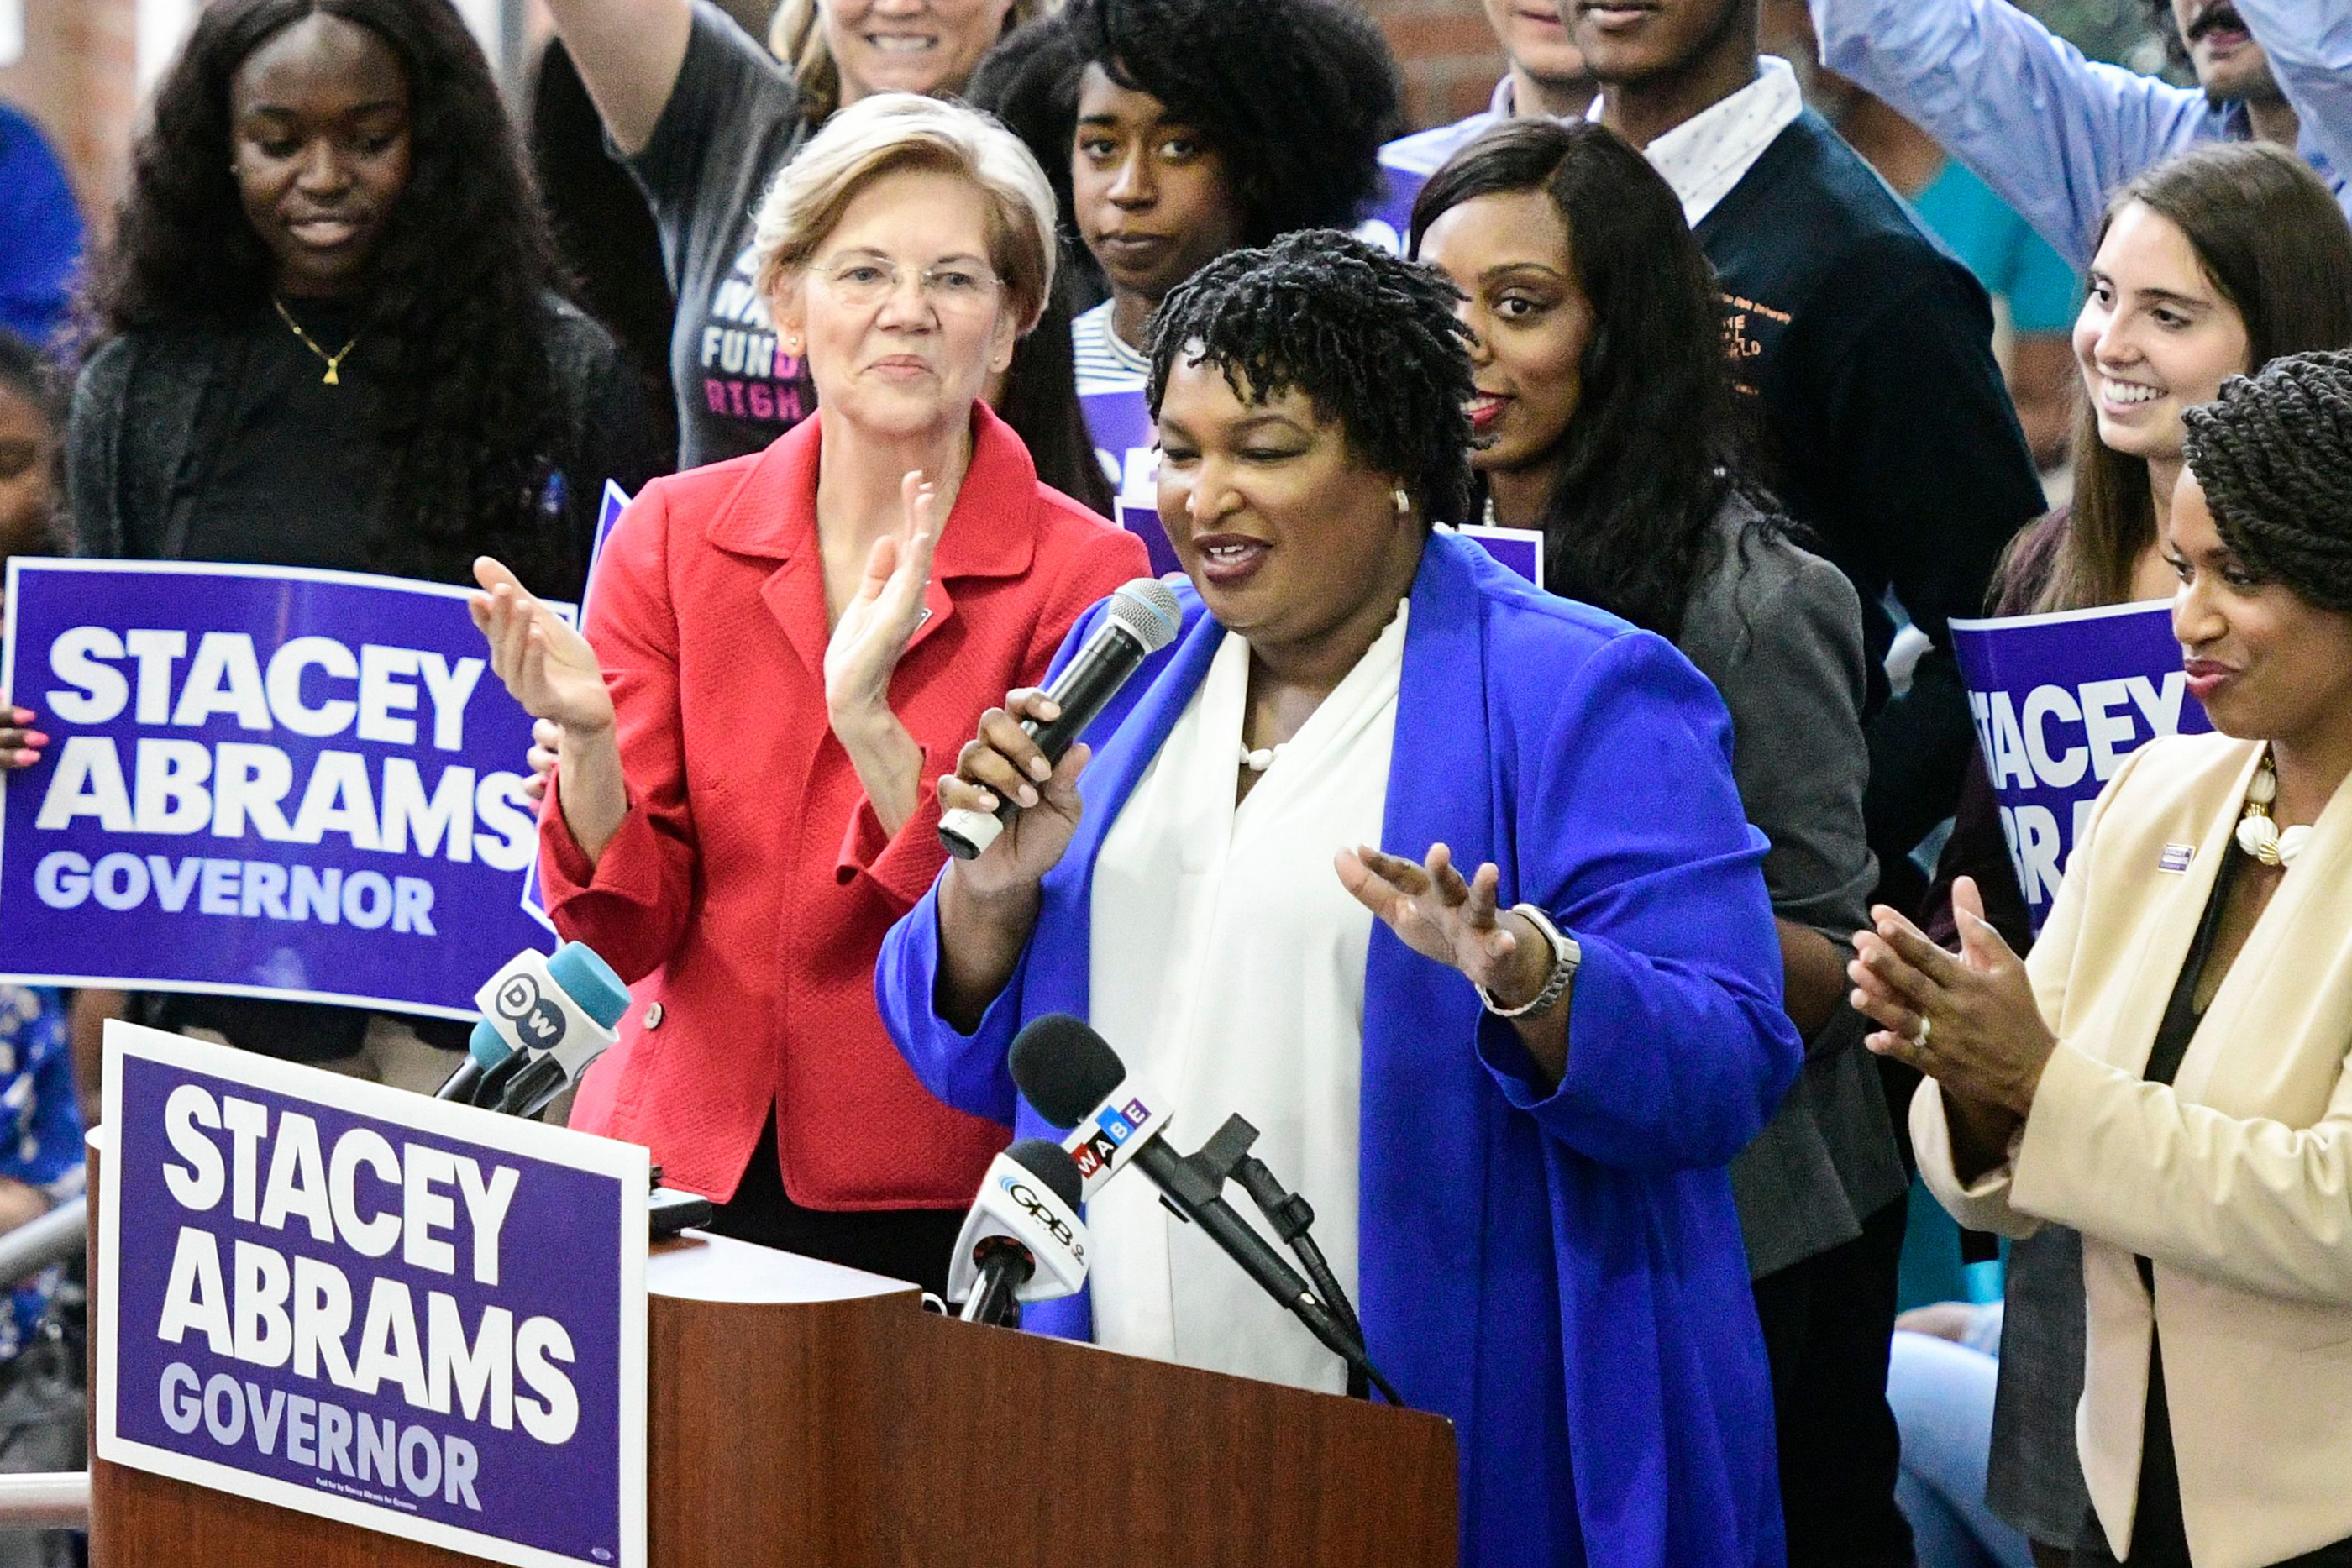 Democratic Georgia gubernatorial nominee Stacey Abrams (C) speaks to supporters while flanked by Boston City Council woman Ayanna Pressley (R) and Democratic Senator from Massachusetts Elizabeth Warren during a campaign rally in Morrow, Georgia, USA, October 9, 2018. (John Amis—EPA-EFE/REX/Shutterstock)